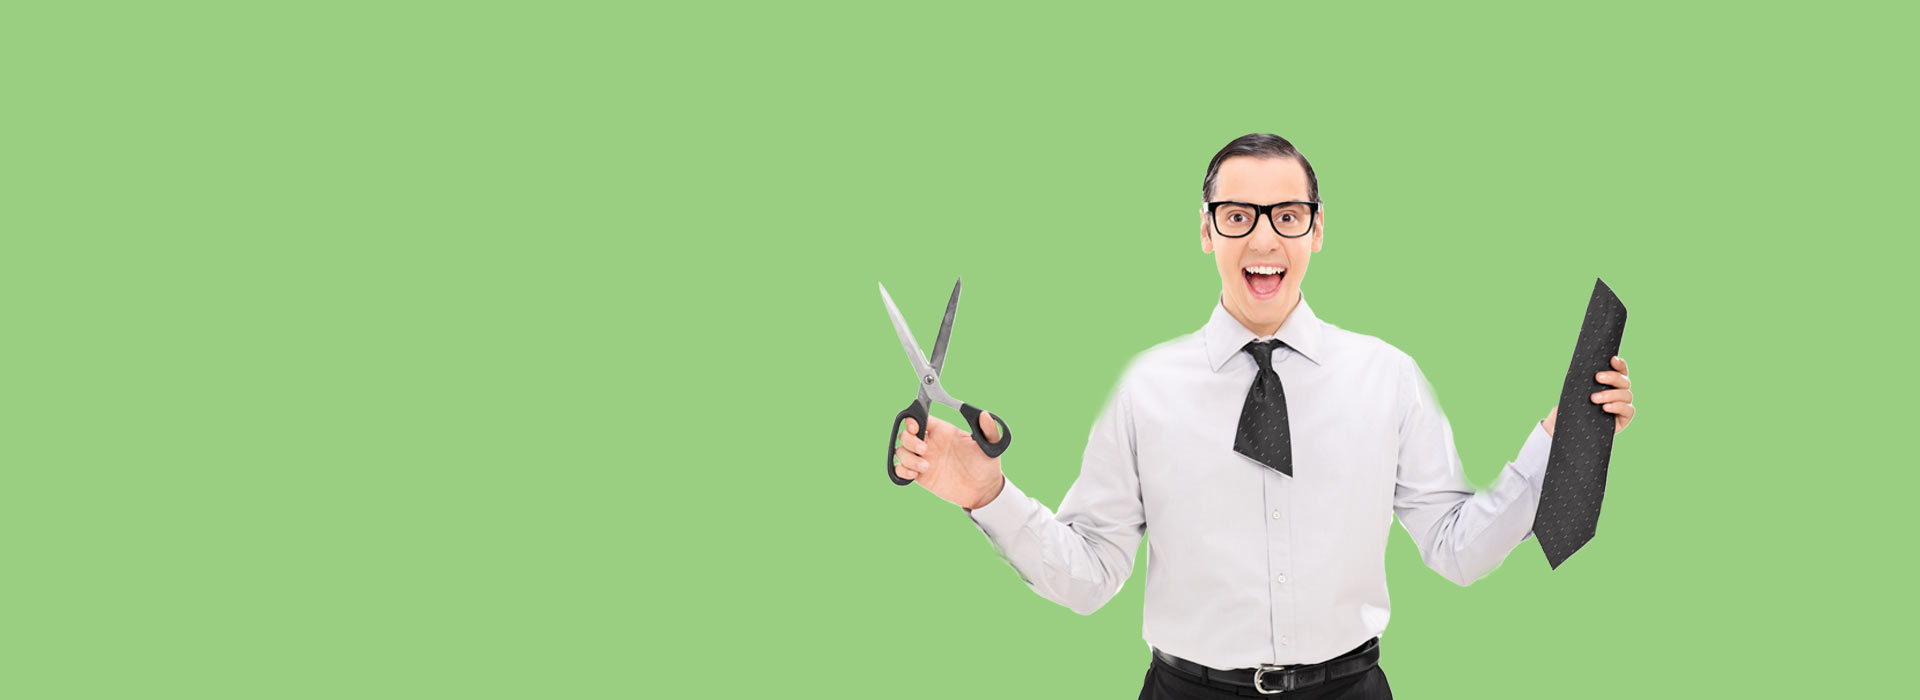 Man with scissors who's cut off his tie